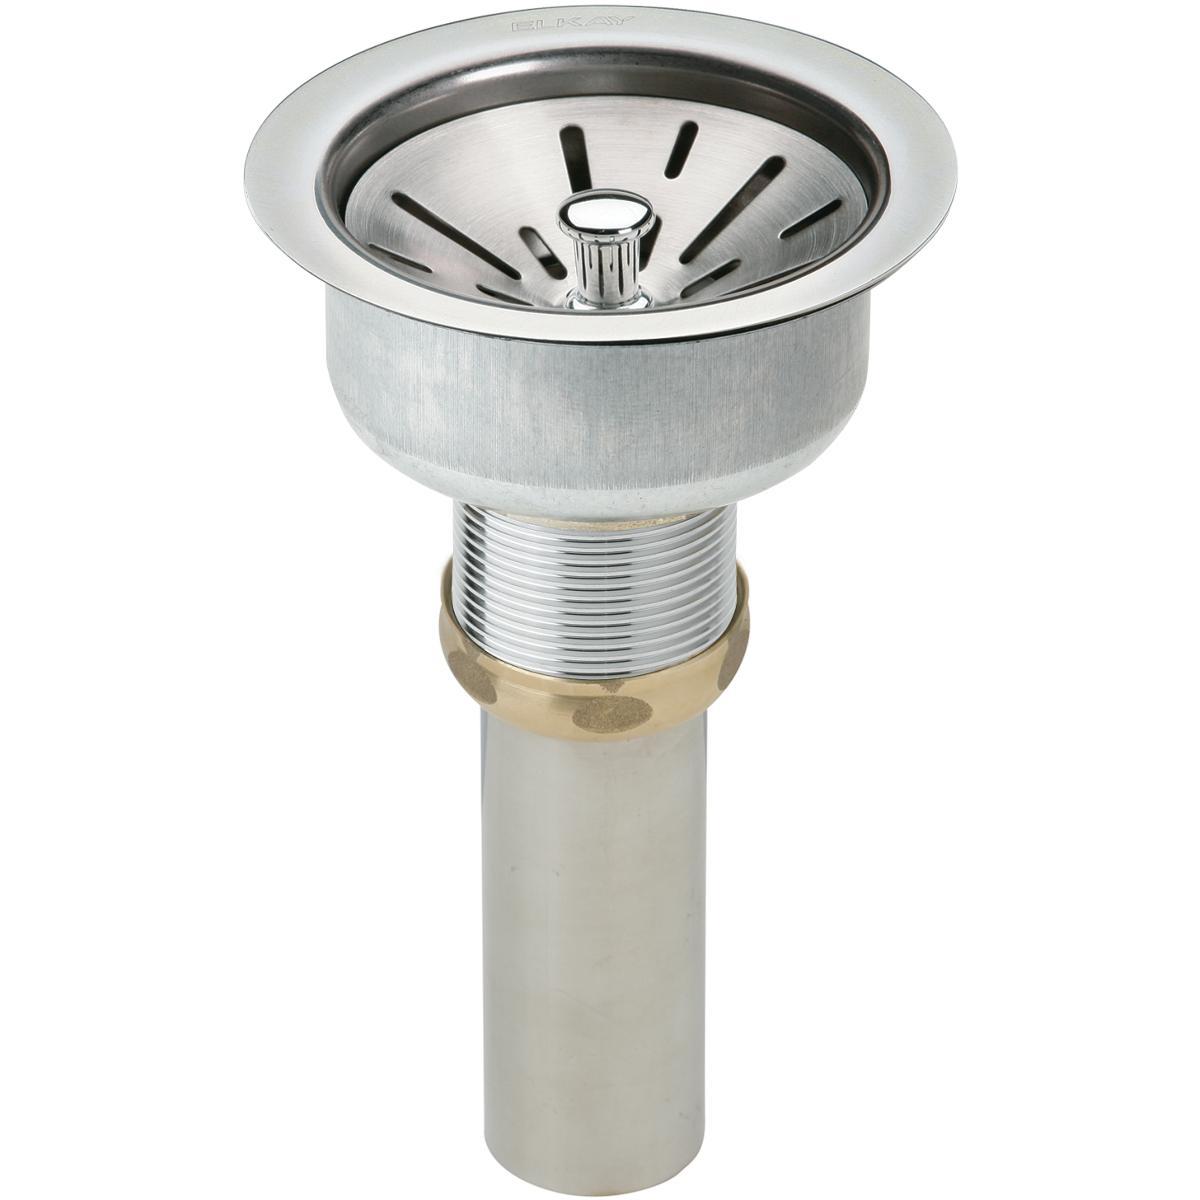 Elkay 3-1/2" Drain Fitting Type 304 Stainless Steel Body, Strainer Basket and Tailpiece-DirectSinks